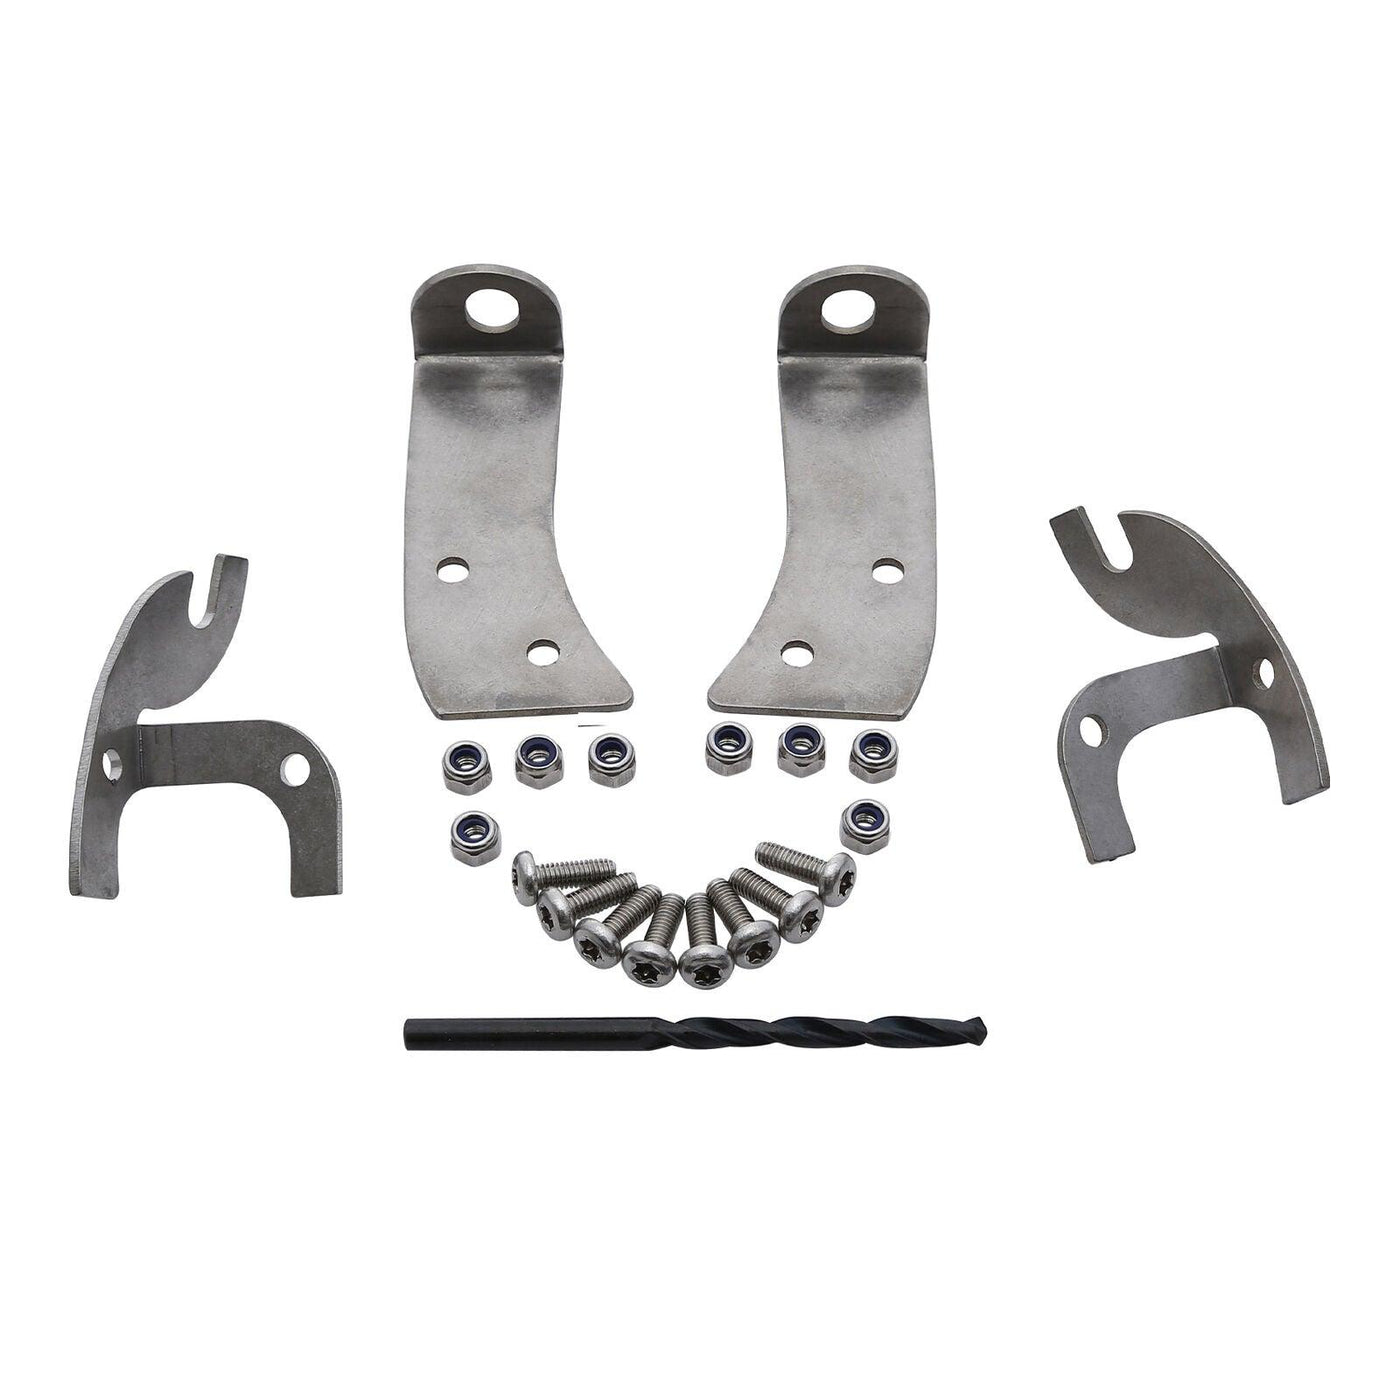 Fairing Support Bracket Repair Kit Fit For Harley Touring Street Glide 06-13 12 - Moto Life Products